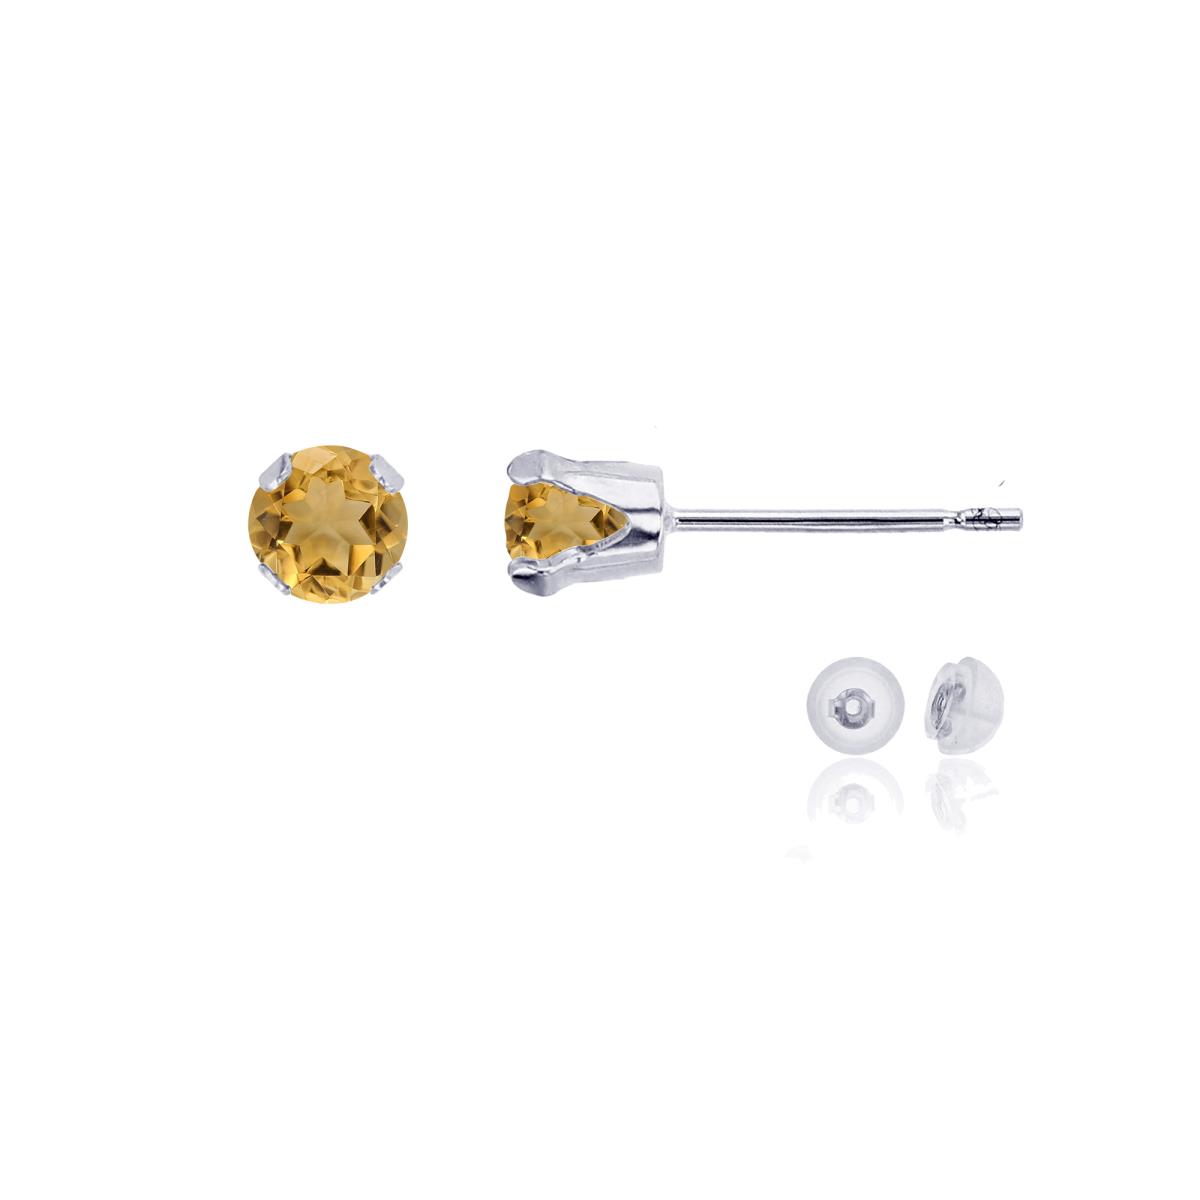 10K White Gold 4mm Round Citrine Stud Earring with Silicone Back